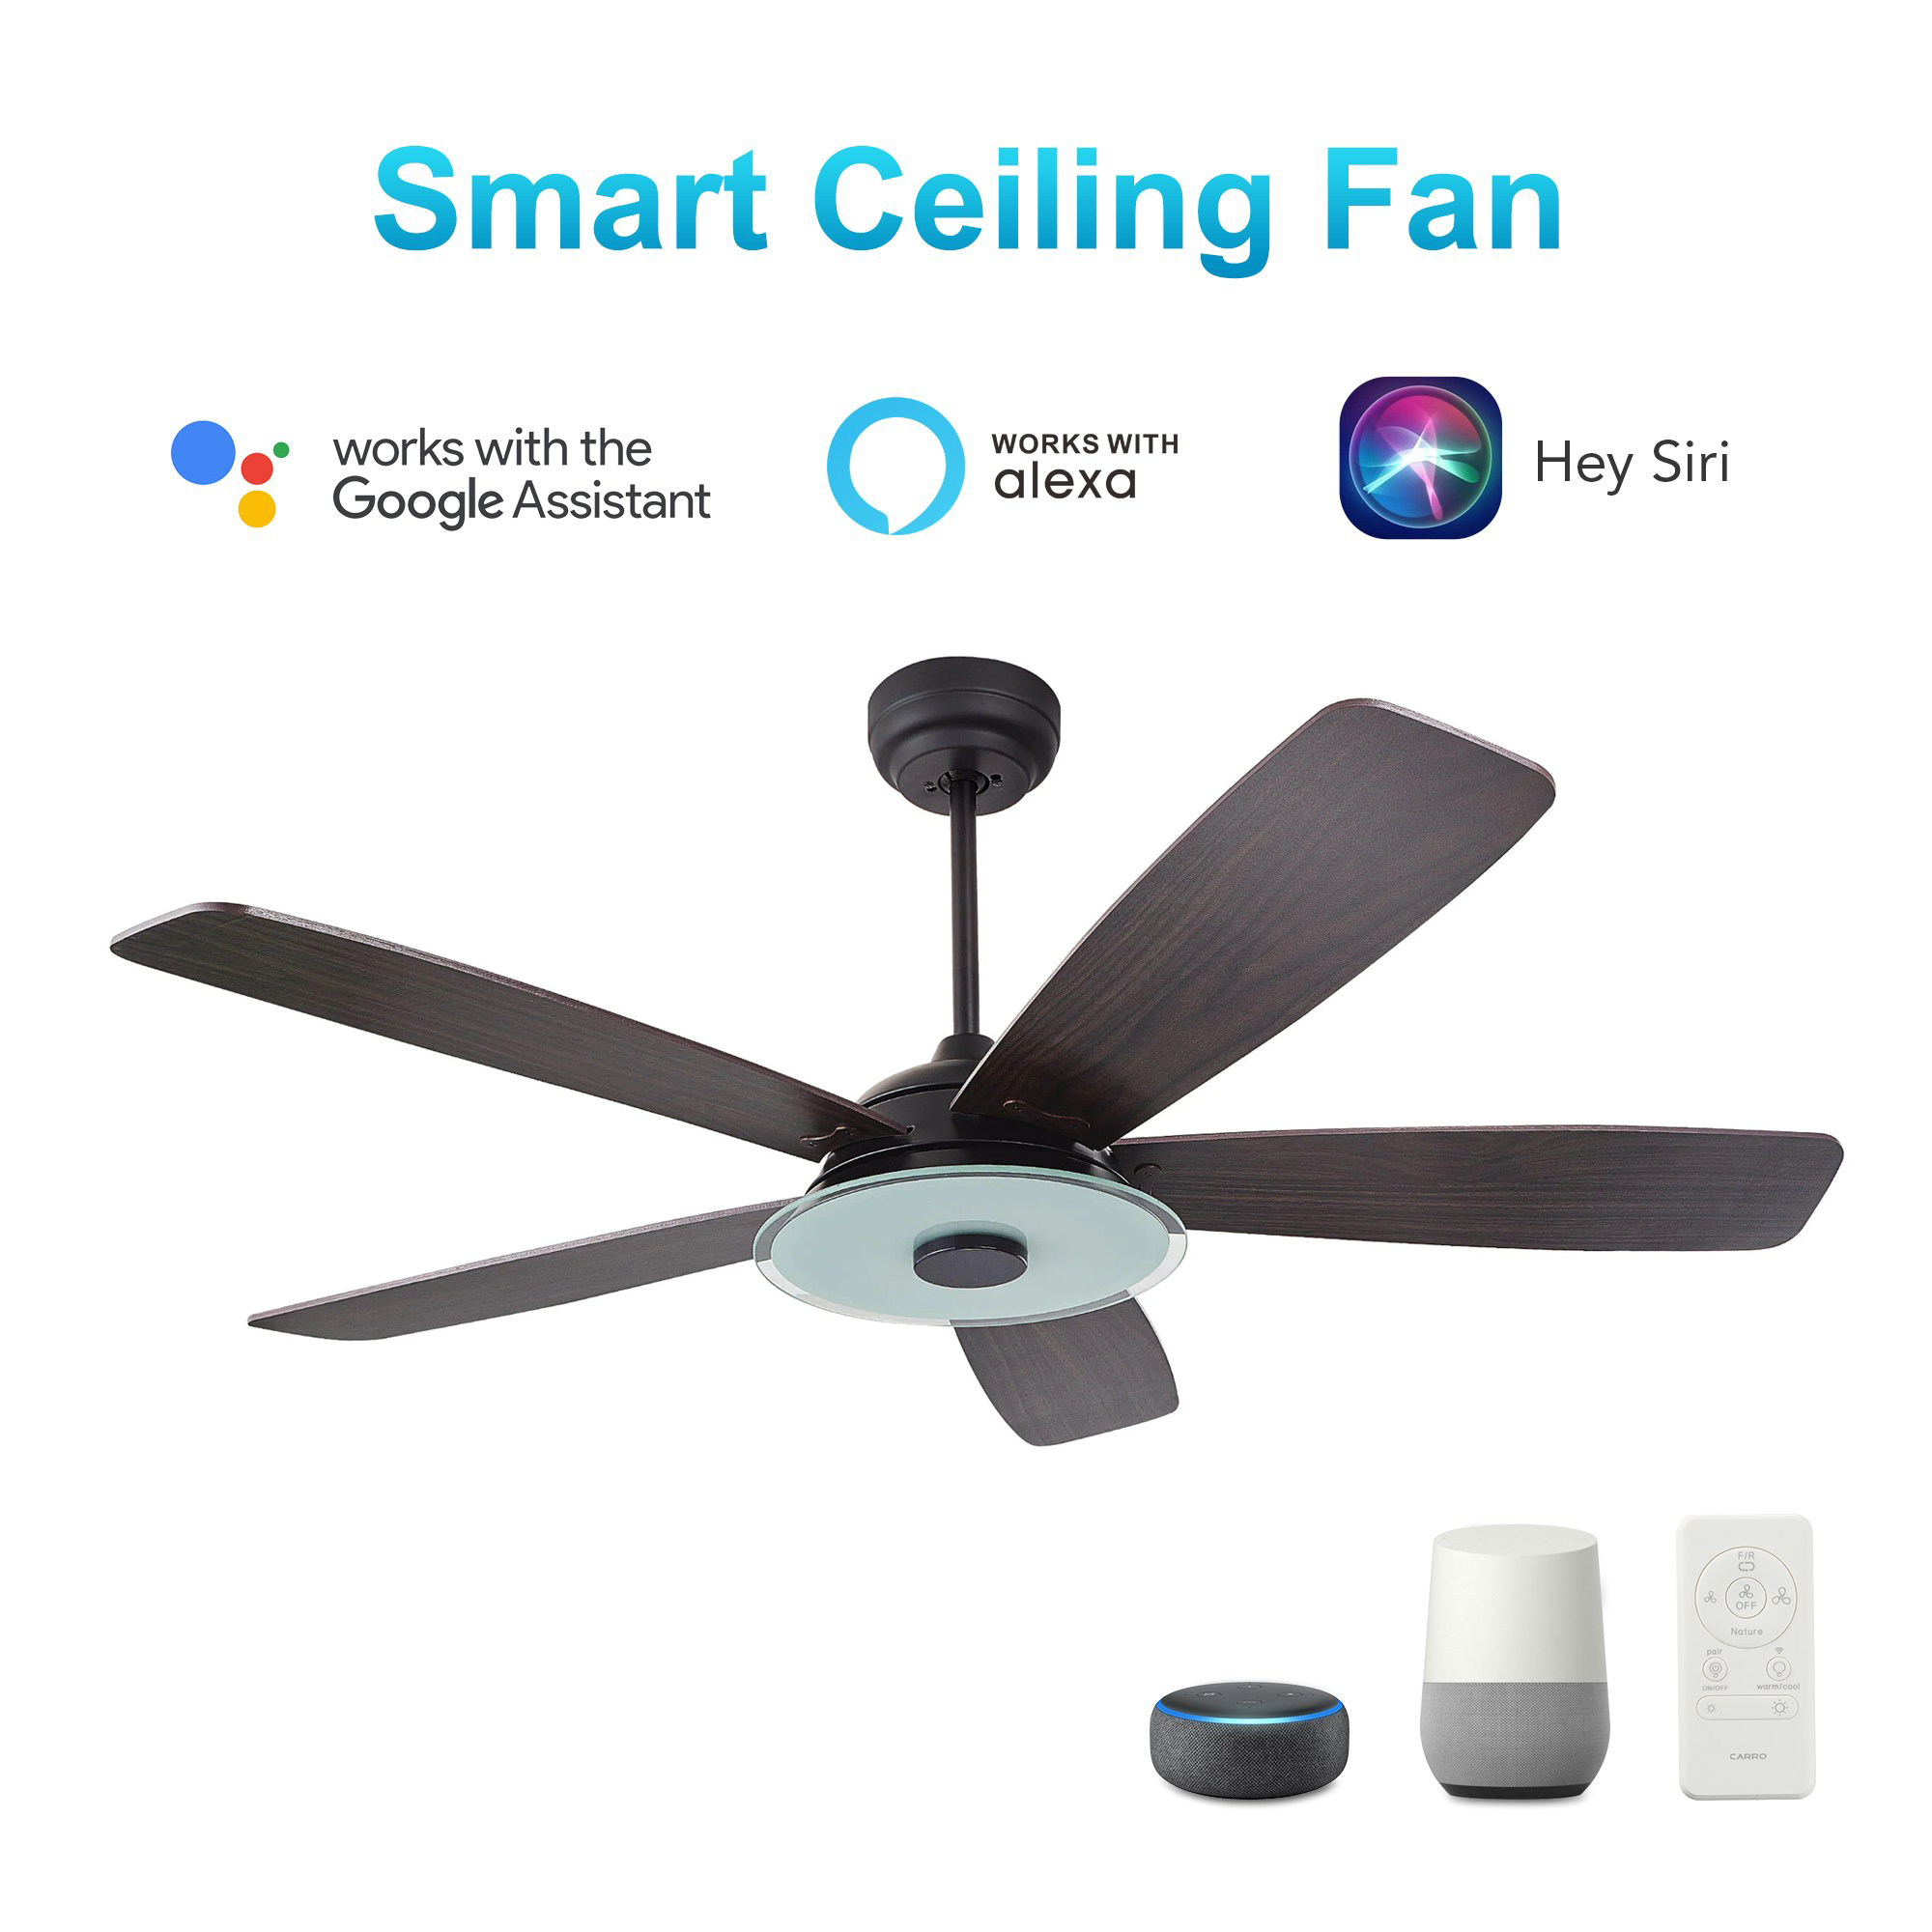 Striker Black/Dark Wood 5 Blade Smart Ceiling Fan with Dimmable LED Light Kit Works with Remote Control, Wi-Fi apps and Voice control via Google Assistant/Alexa/Siri